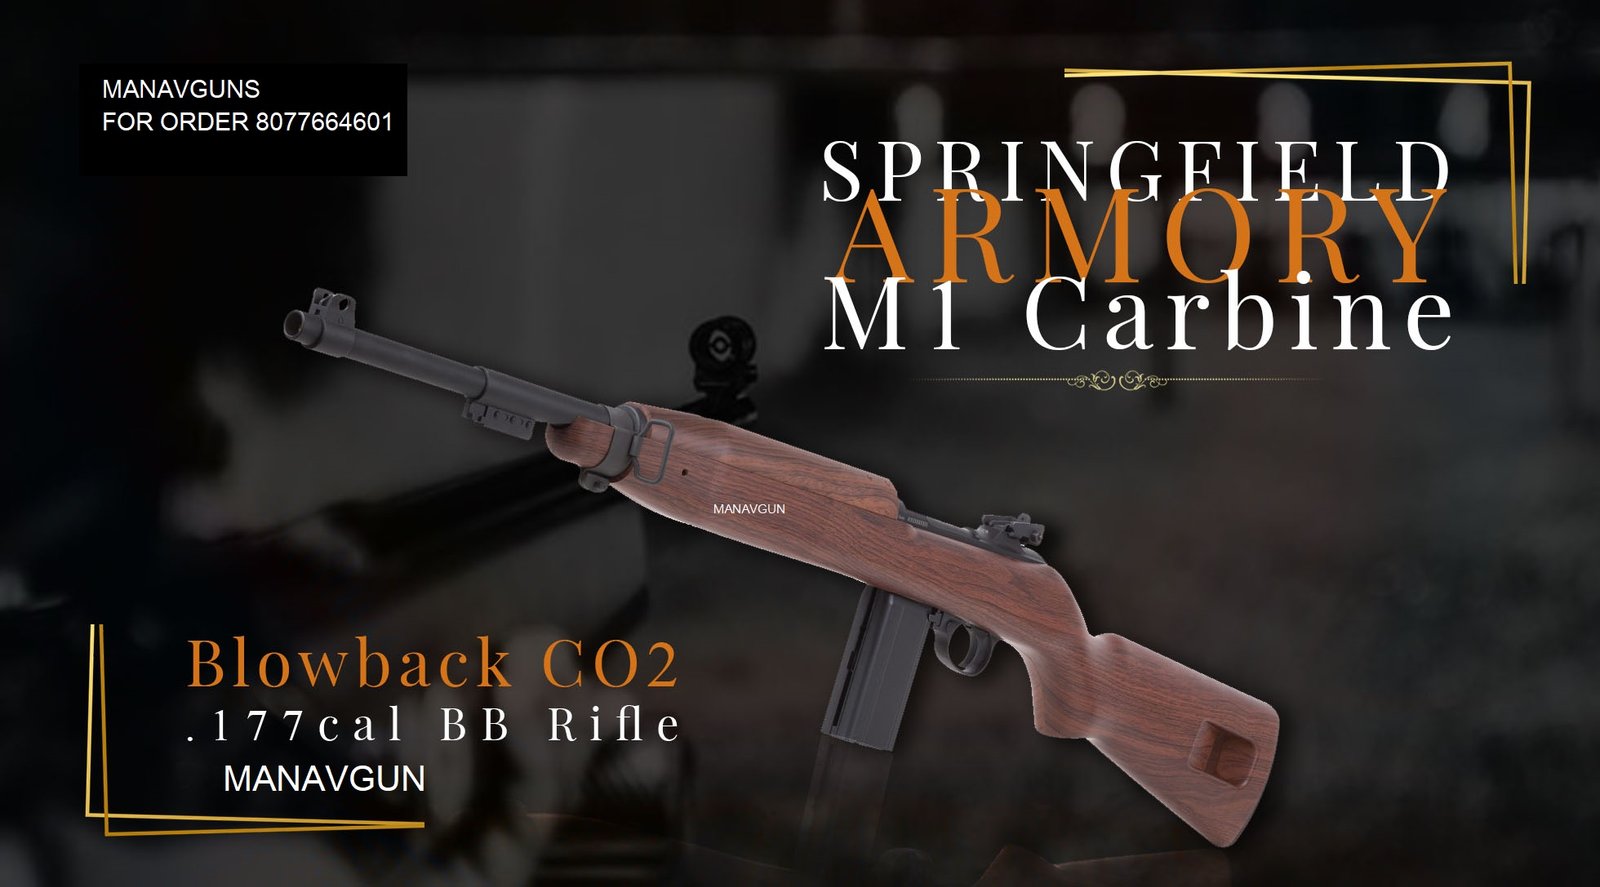 Springfield Armory M1 Carbine, Blowback CO2 .177cal BB Rifle By